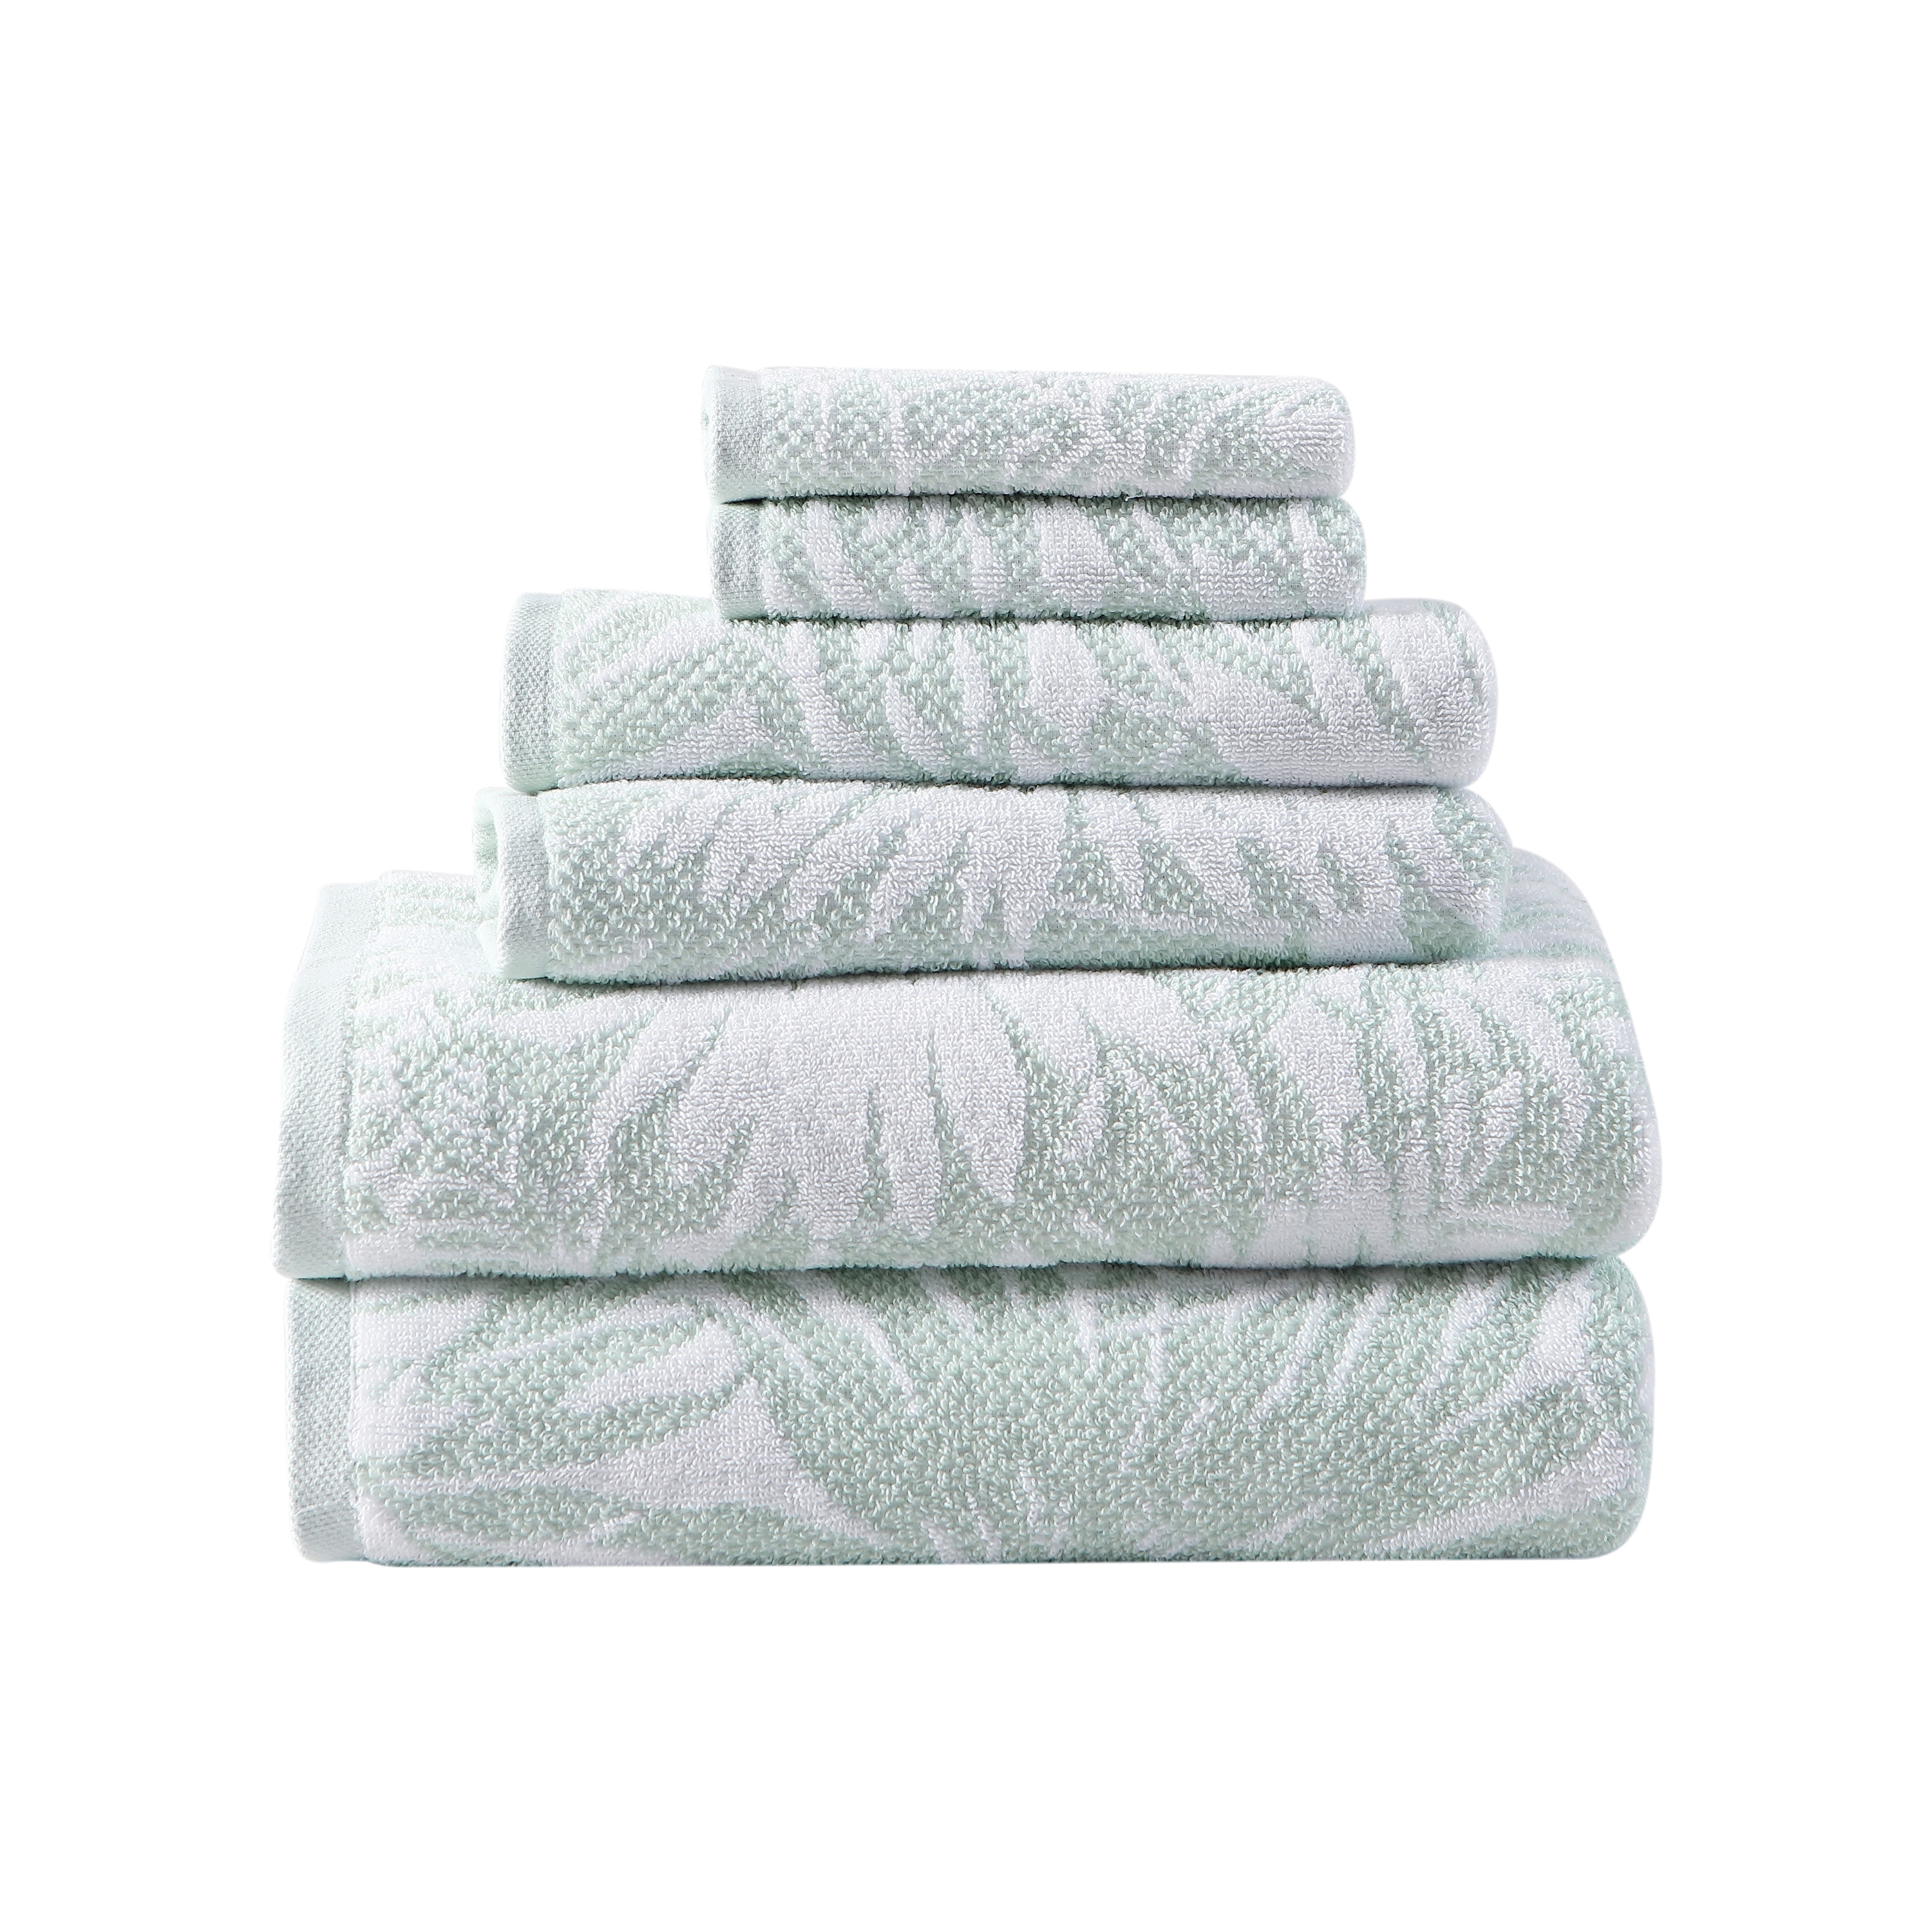 https://ak1.ostkcdn.com/images/products/is/images/direct/09328a04c458e9df7a4da9cac424bfbd207822fd/Tommy-Bahama-Lago-Palm-Cotton-Green-6-Piece-Towel-Set.jpg